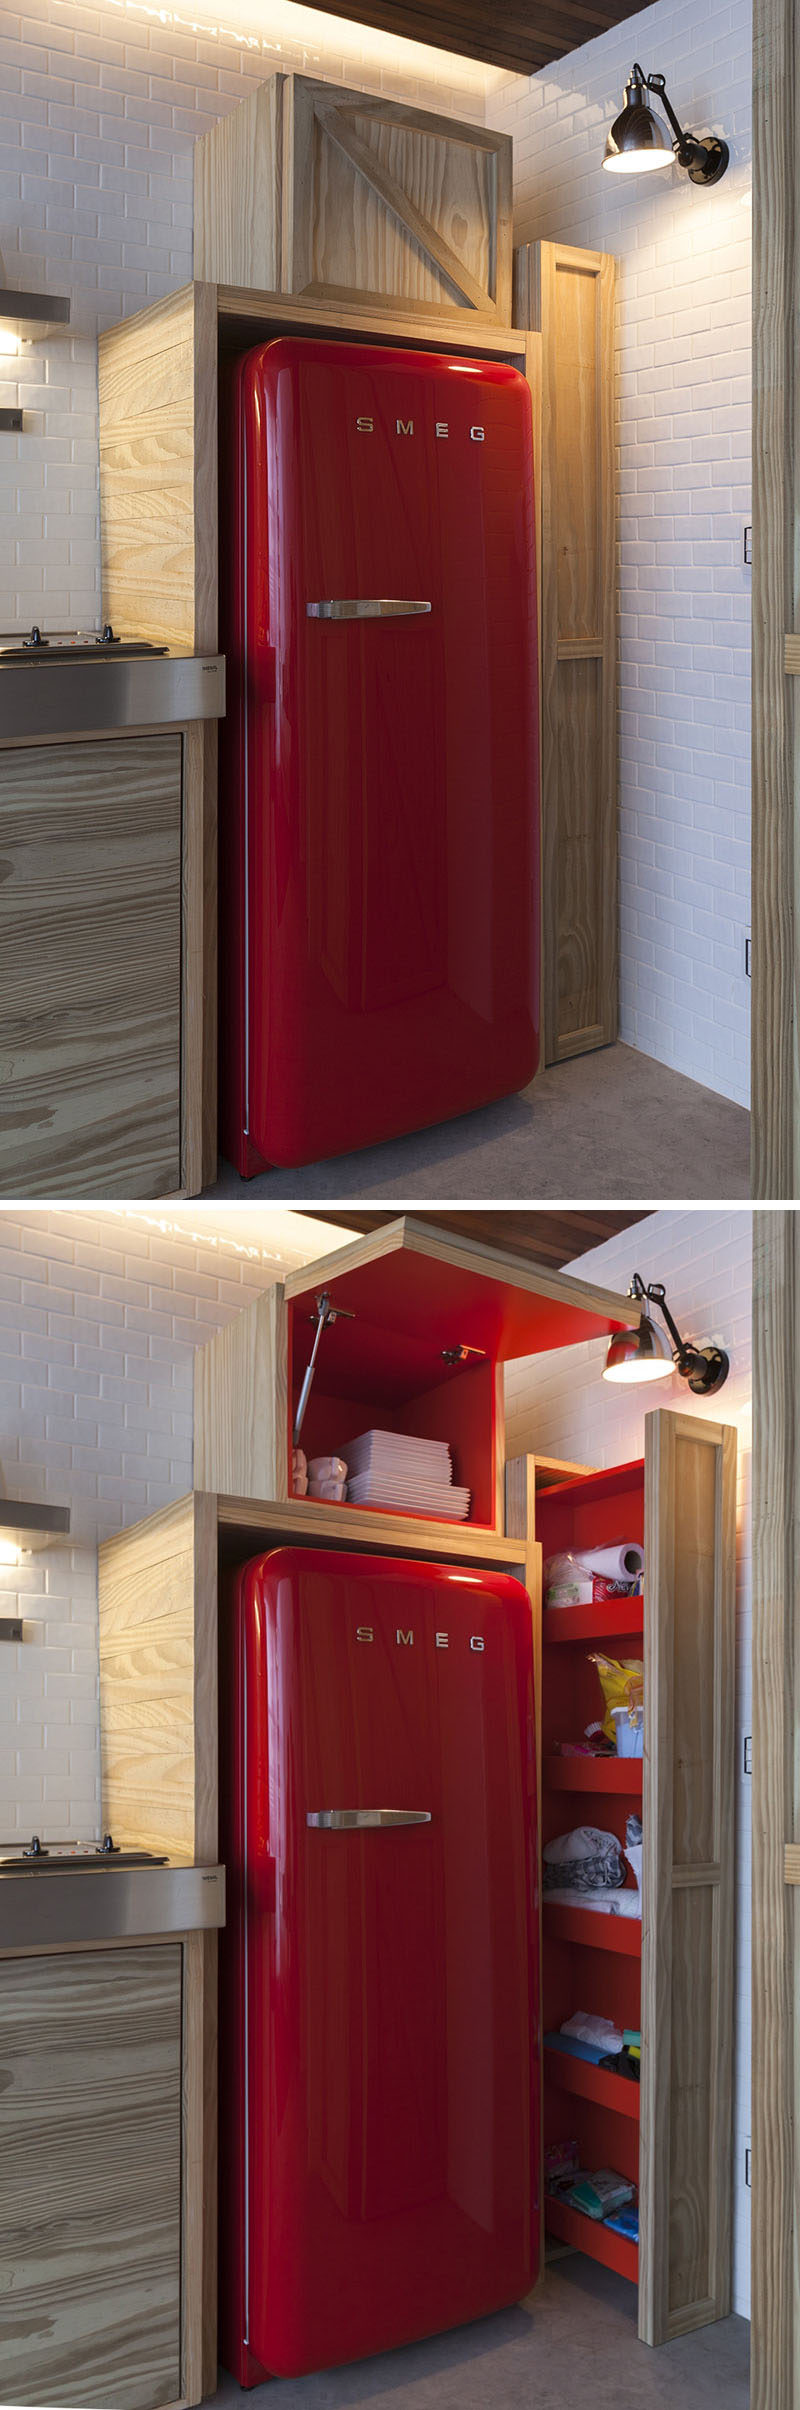 The cabinets that surround this bright red SMEG fridge, have a hidden pop of colour that matches the color of the fridge.